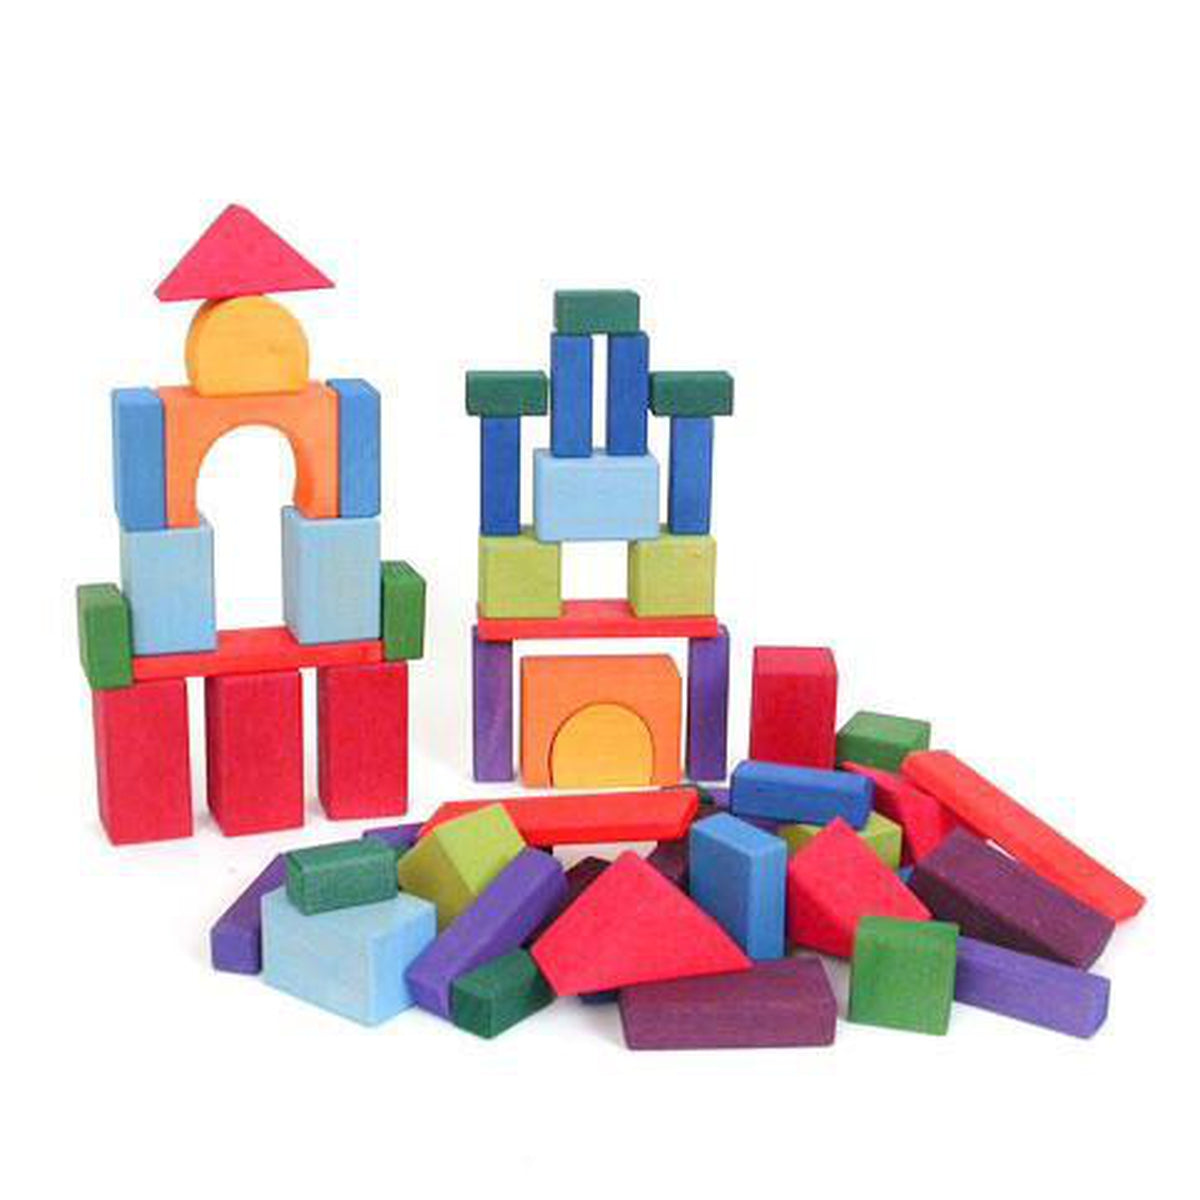 Grimm's wooden building blocks set of 60-blocks & building sets-Fire the Imagination-Dilly Dally Kids